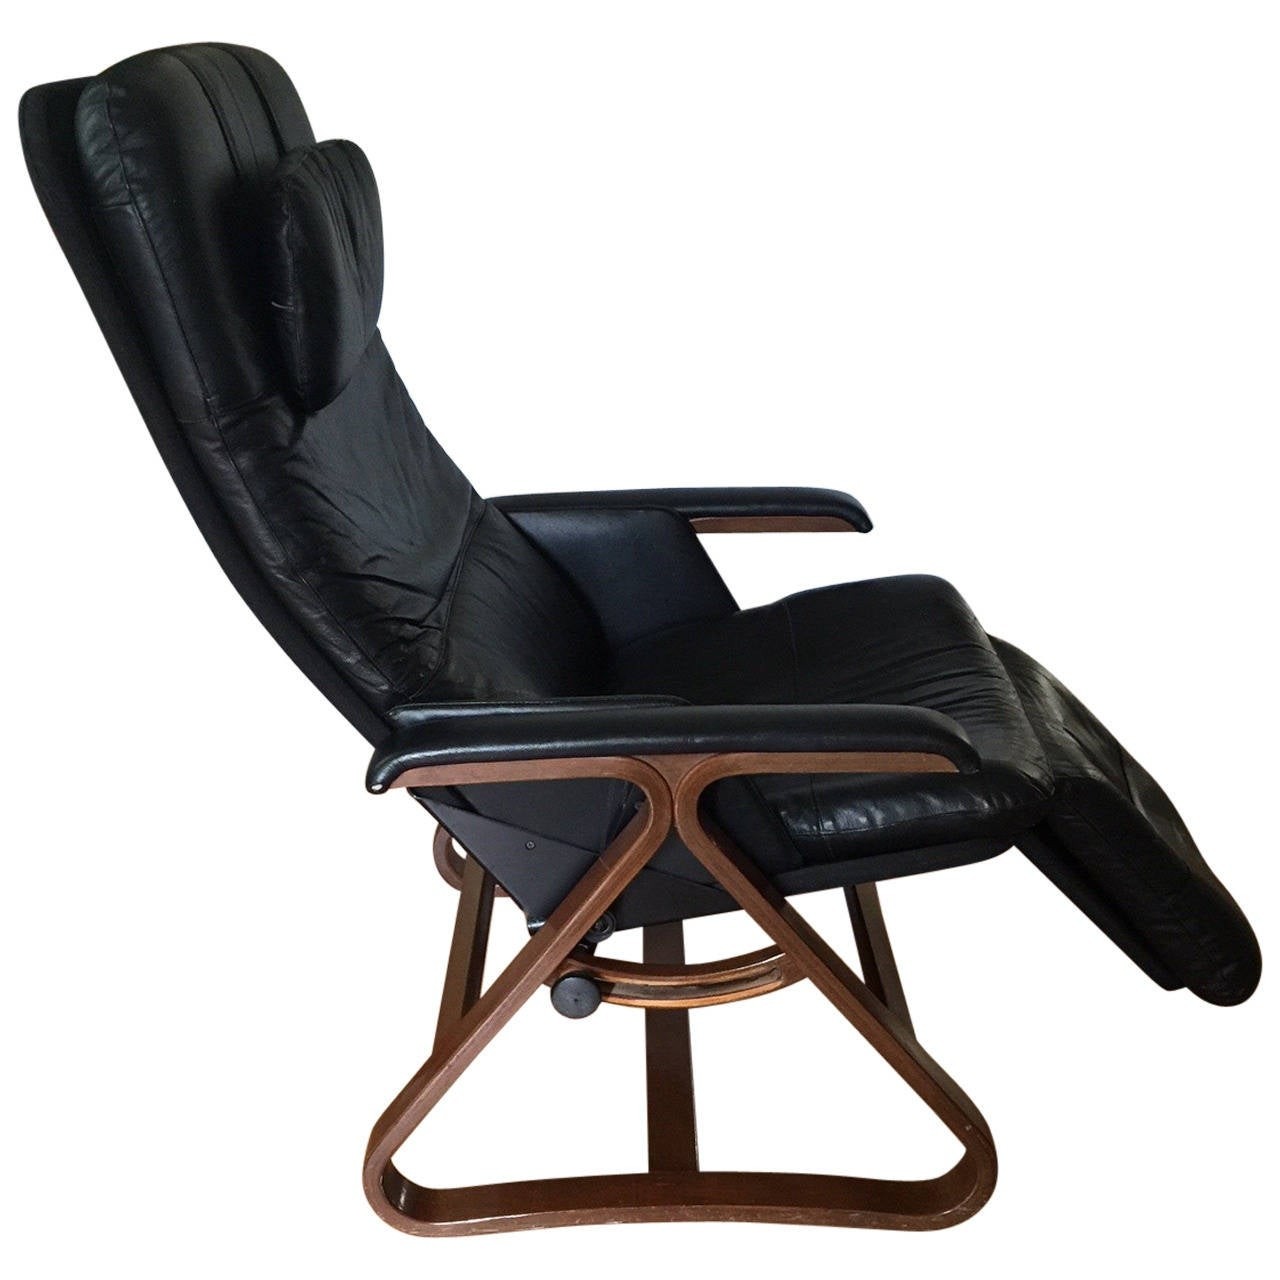 Danish style leather recliner midcentury modern at 1stdibs